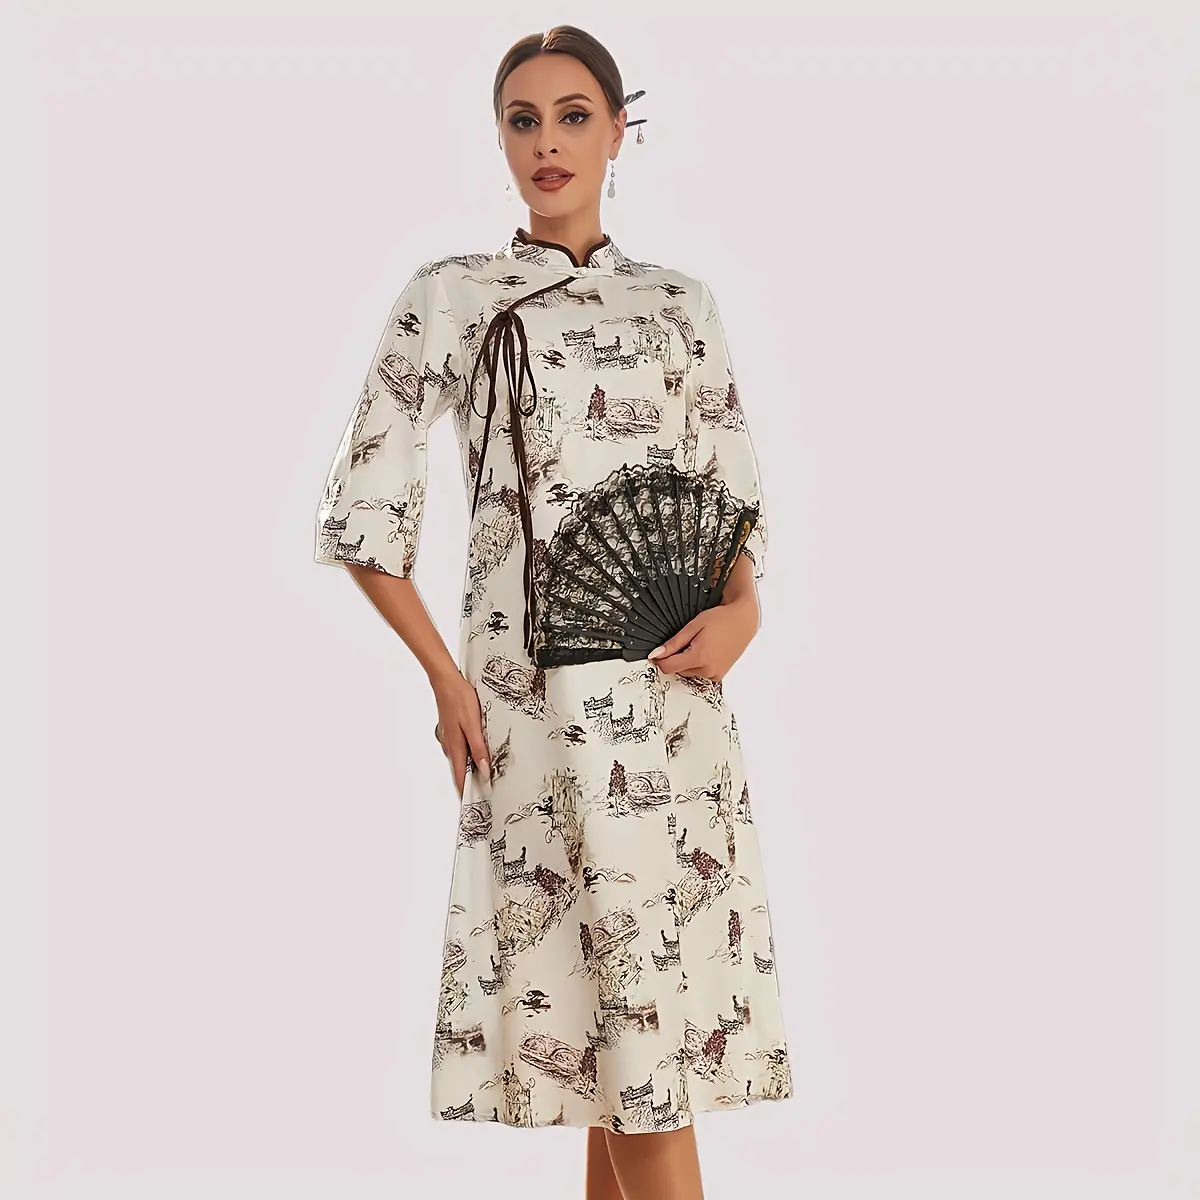 TICOSA Mid-length improved cheongsam retro Chinese style spring and summer new fashion young print dress